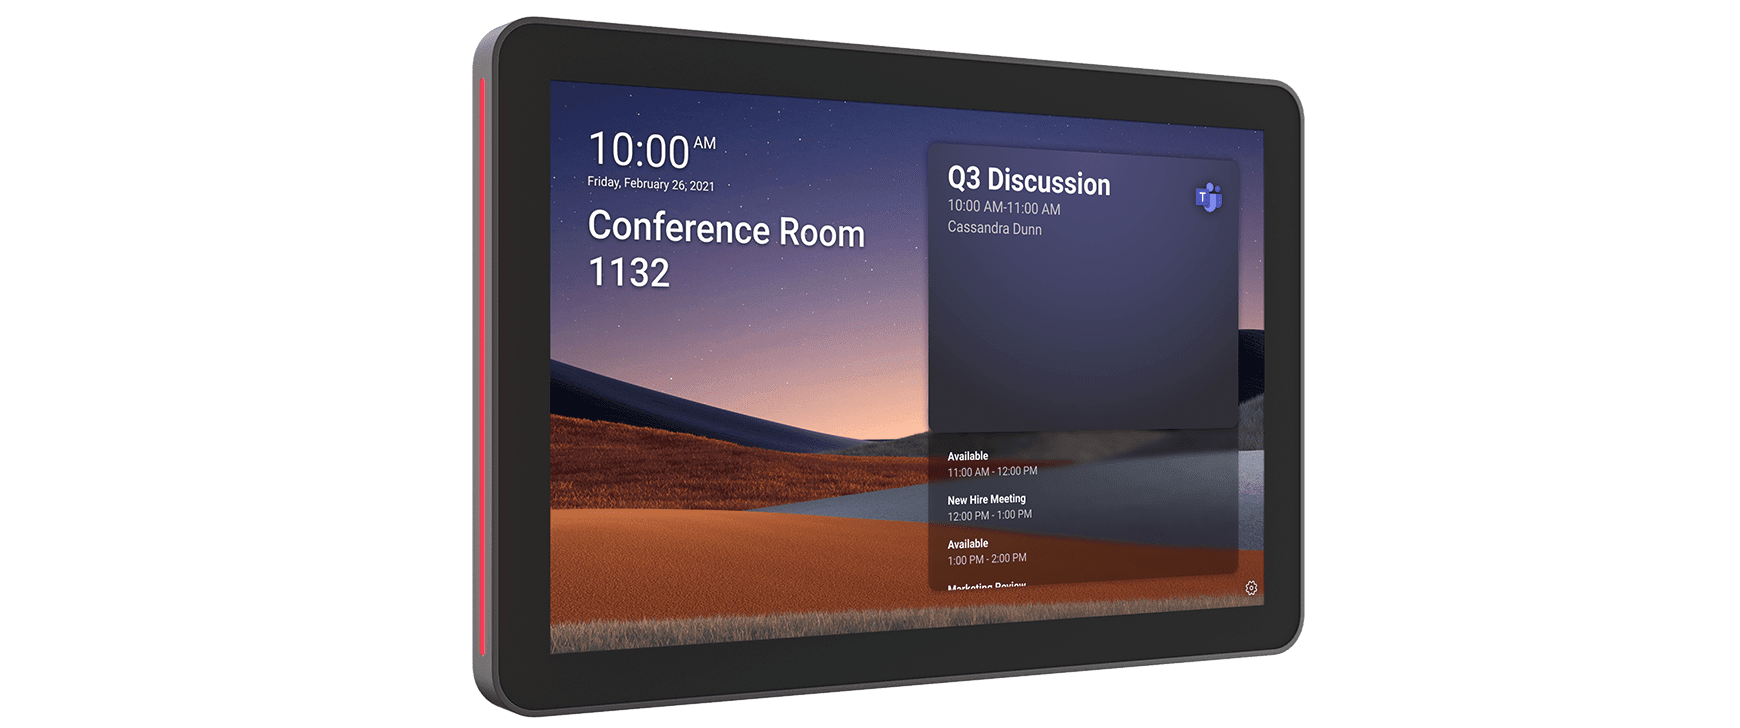 Microsoft meeting room touch controller in discussion display